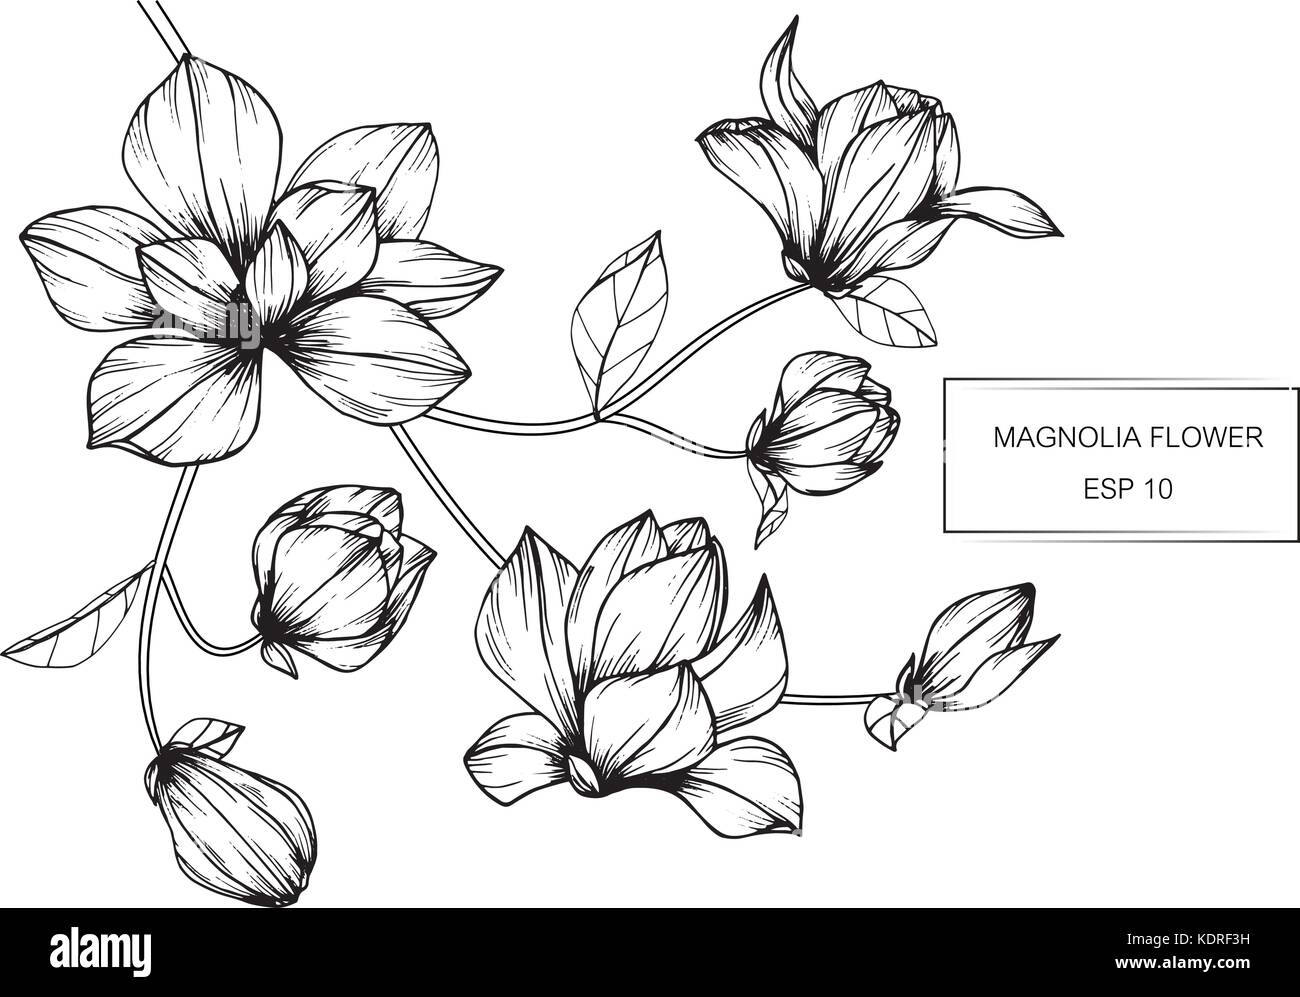 Sketch floral botany collection. magnolia flower drawings. black wall mural  • murals banner, black, beauty | myloview.com